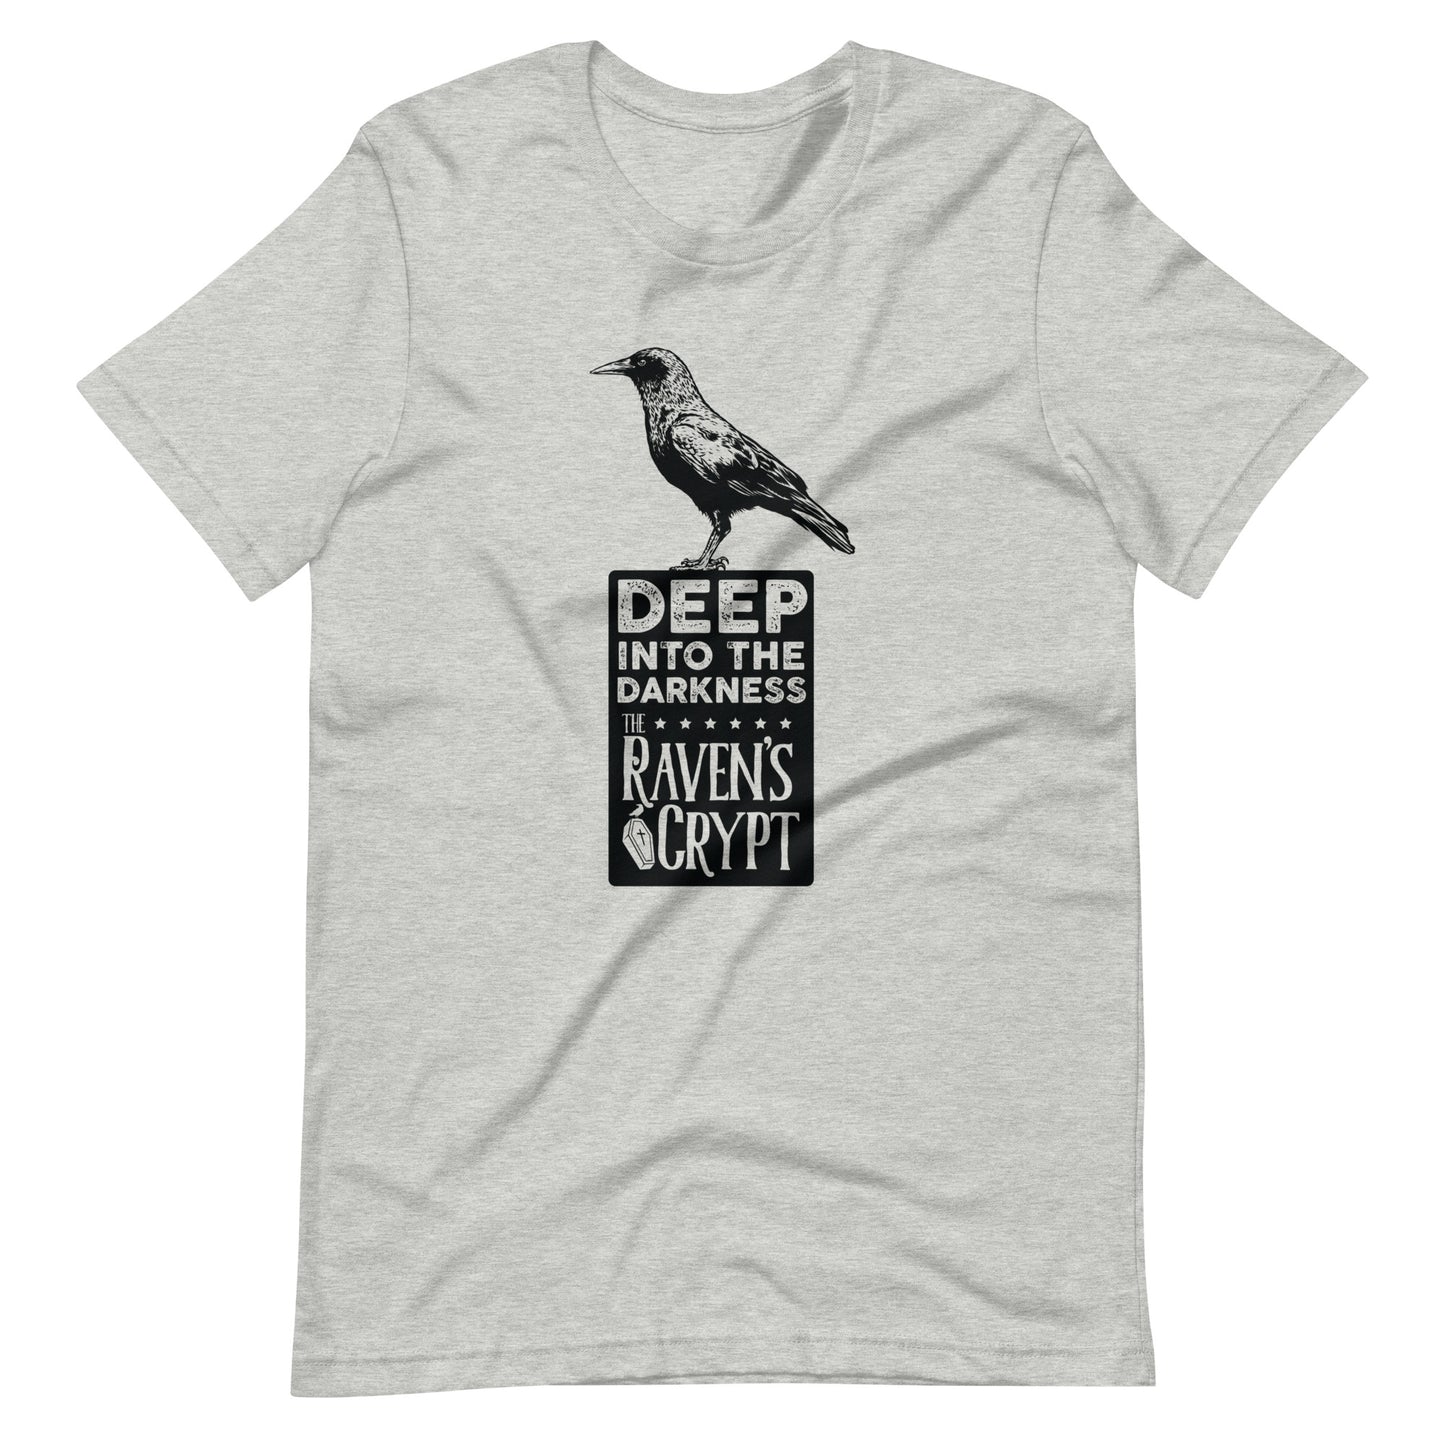 Deep Into the Darkness Crypt 2 - Men's t-shirt - Athletic Heather Front